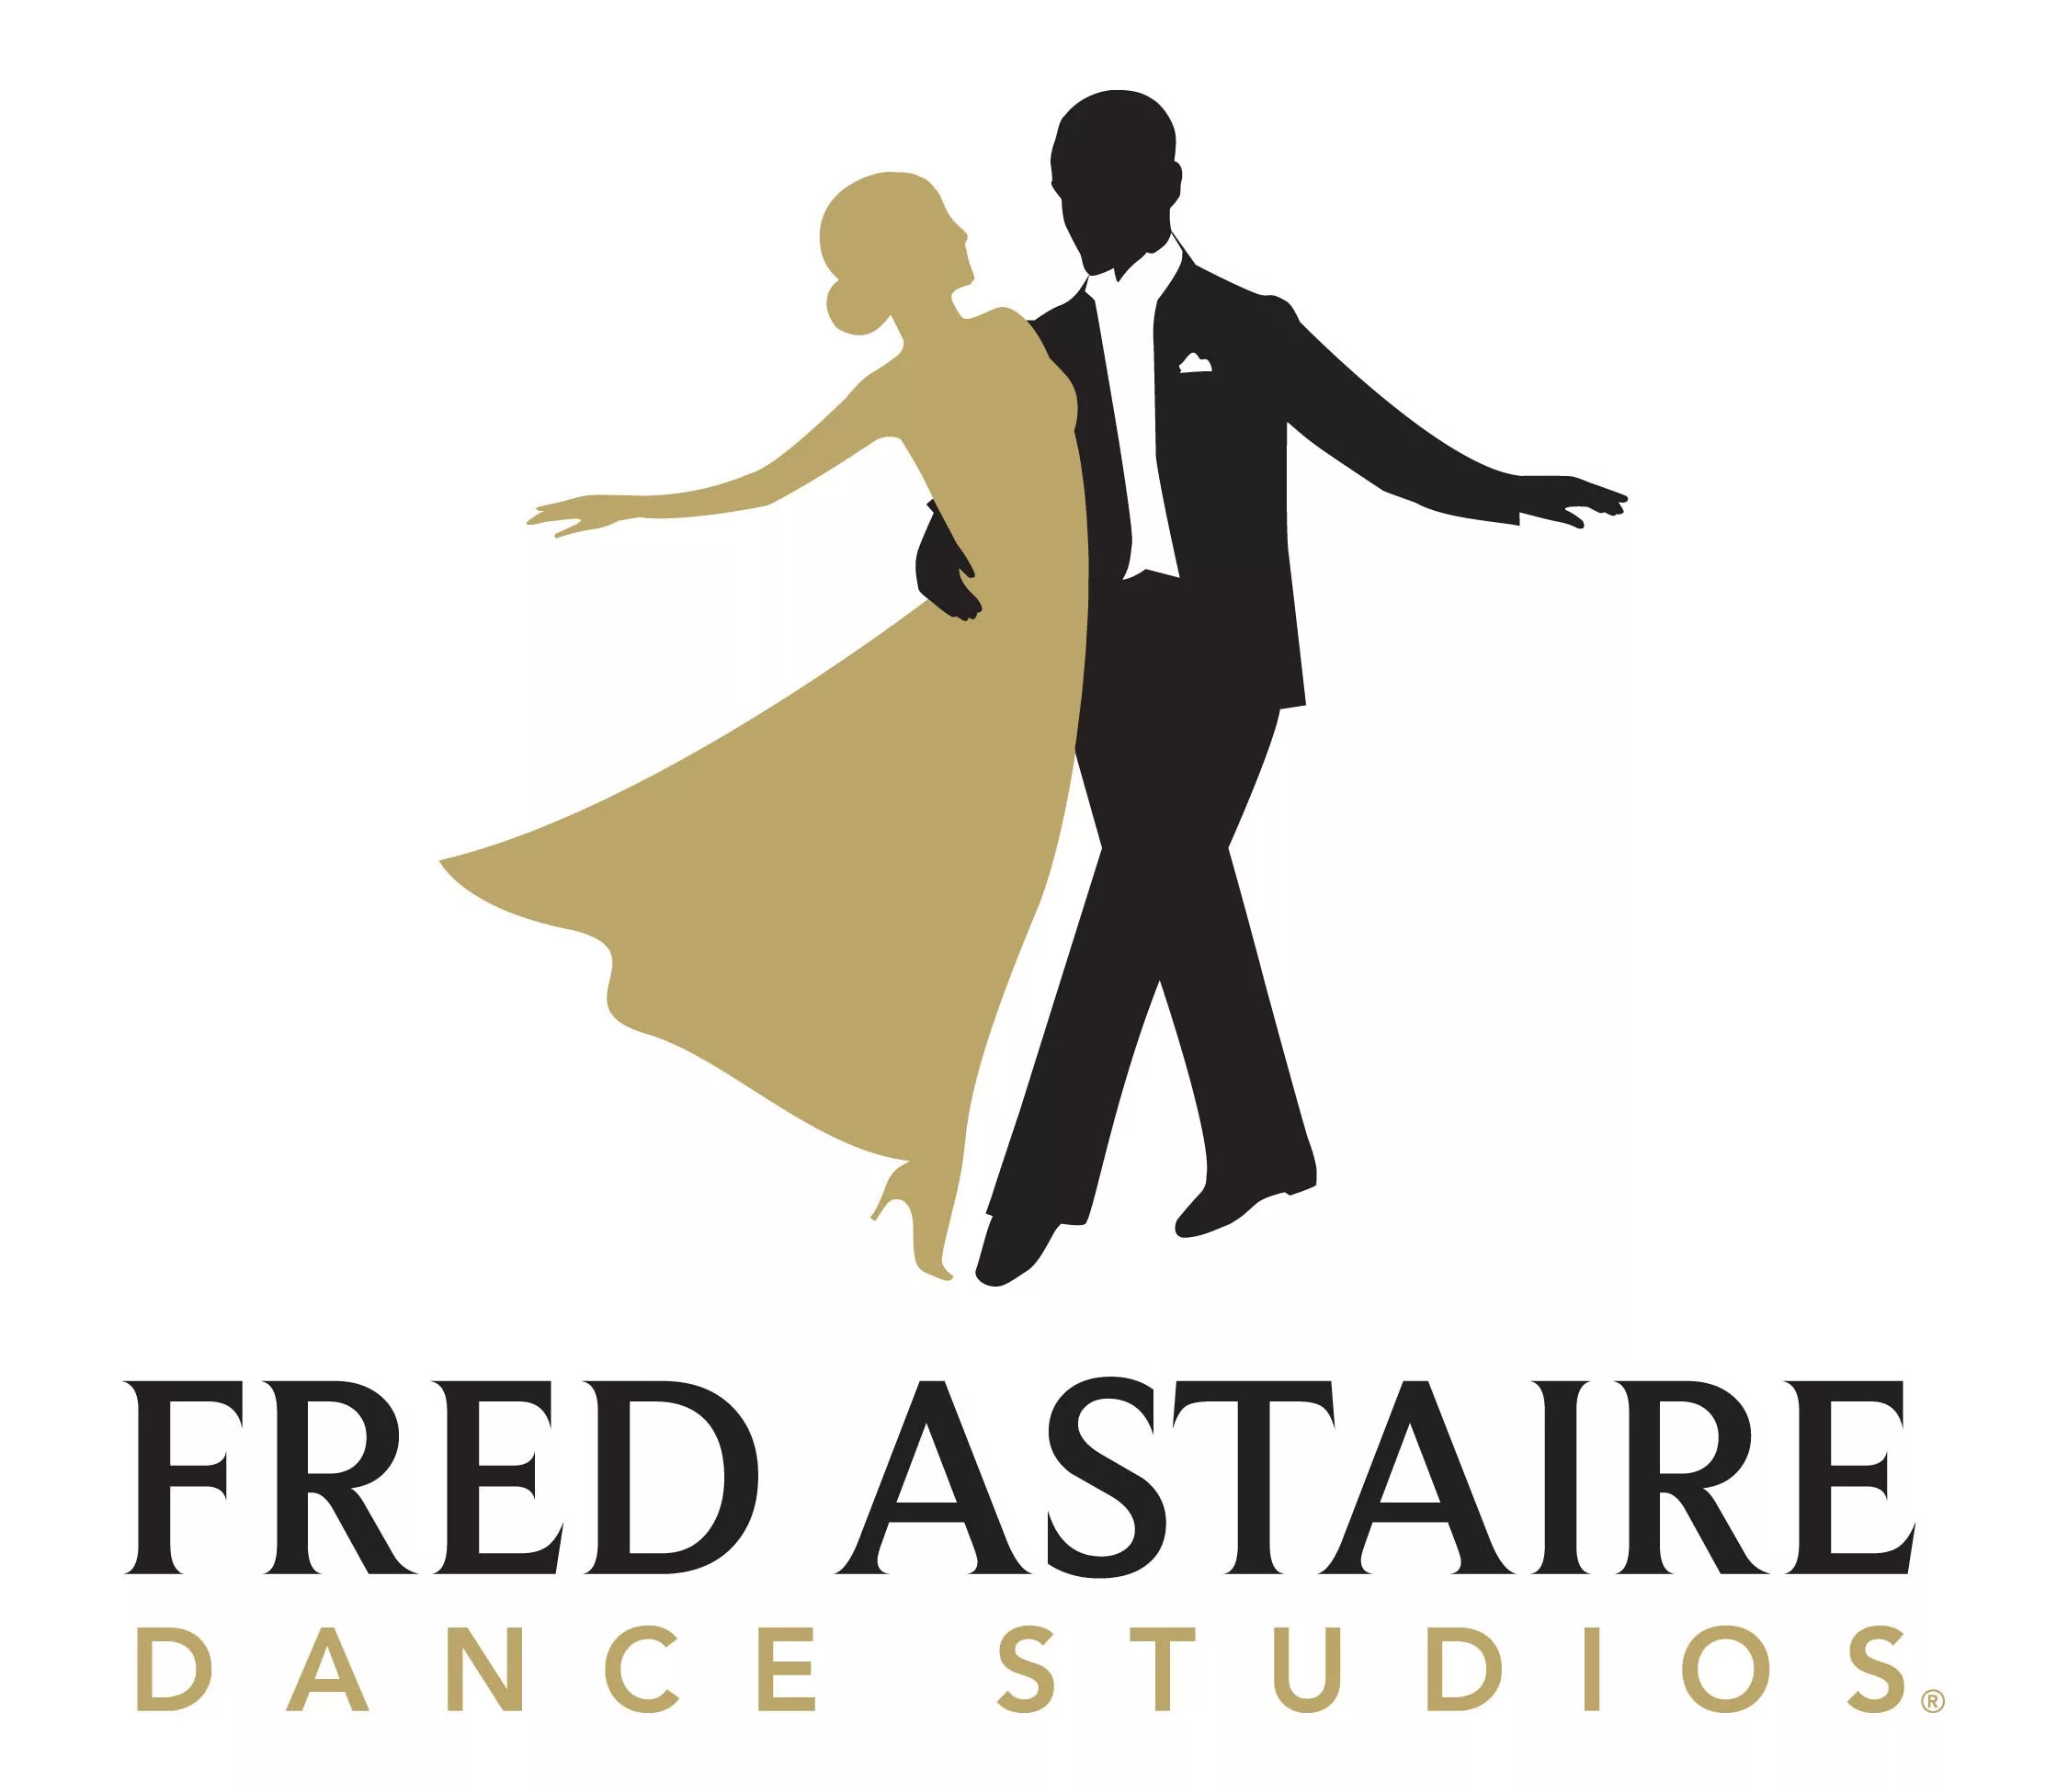 A golden figure of a woman in an evening gown dances with a figure of a man in a black tux above the words "Fred Astaire Dance Studios" in black and gold over a white background